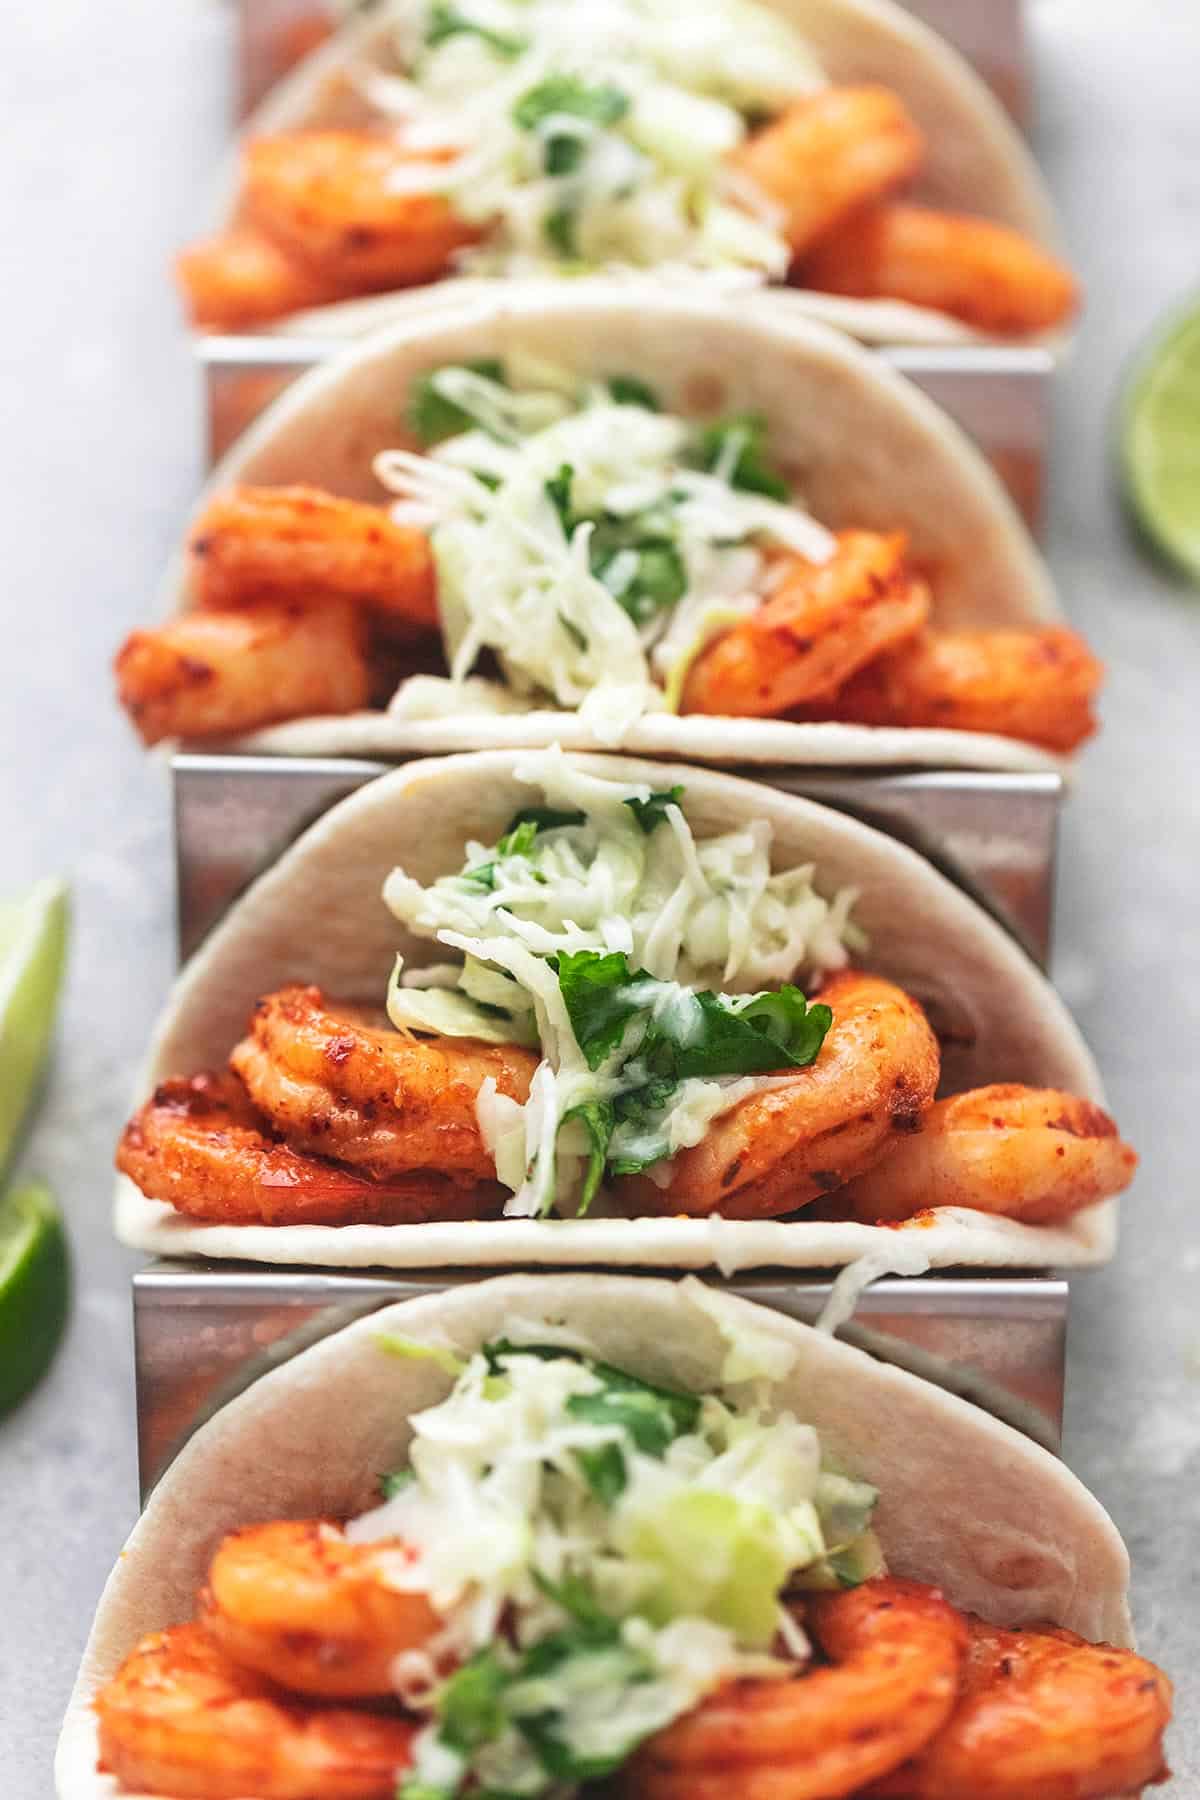 shrimp tacos with slaw in taco holders.